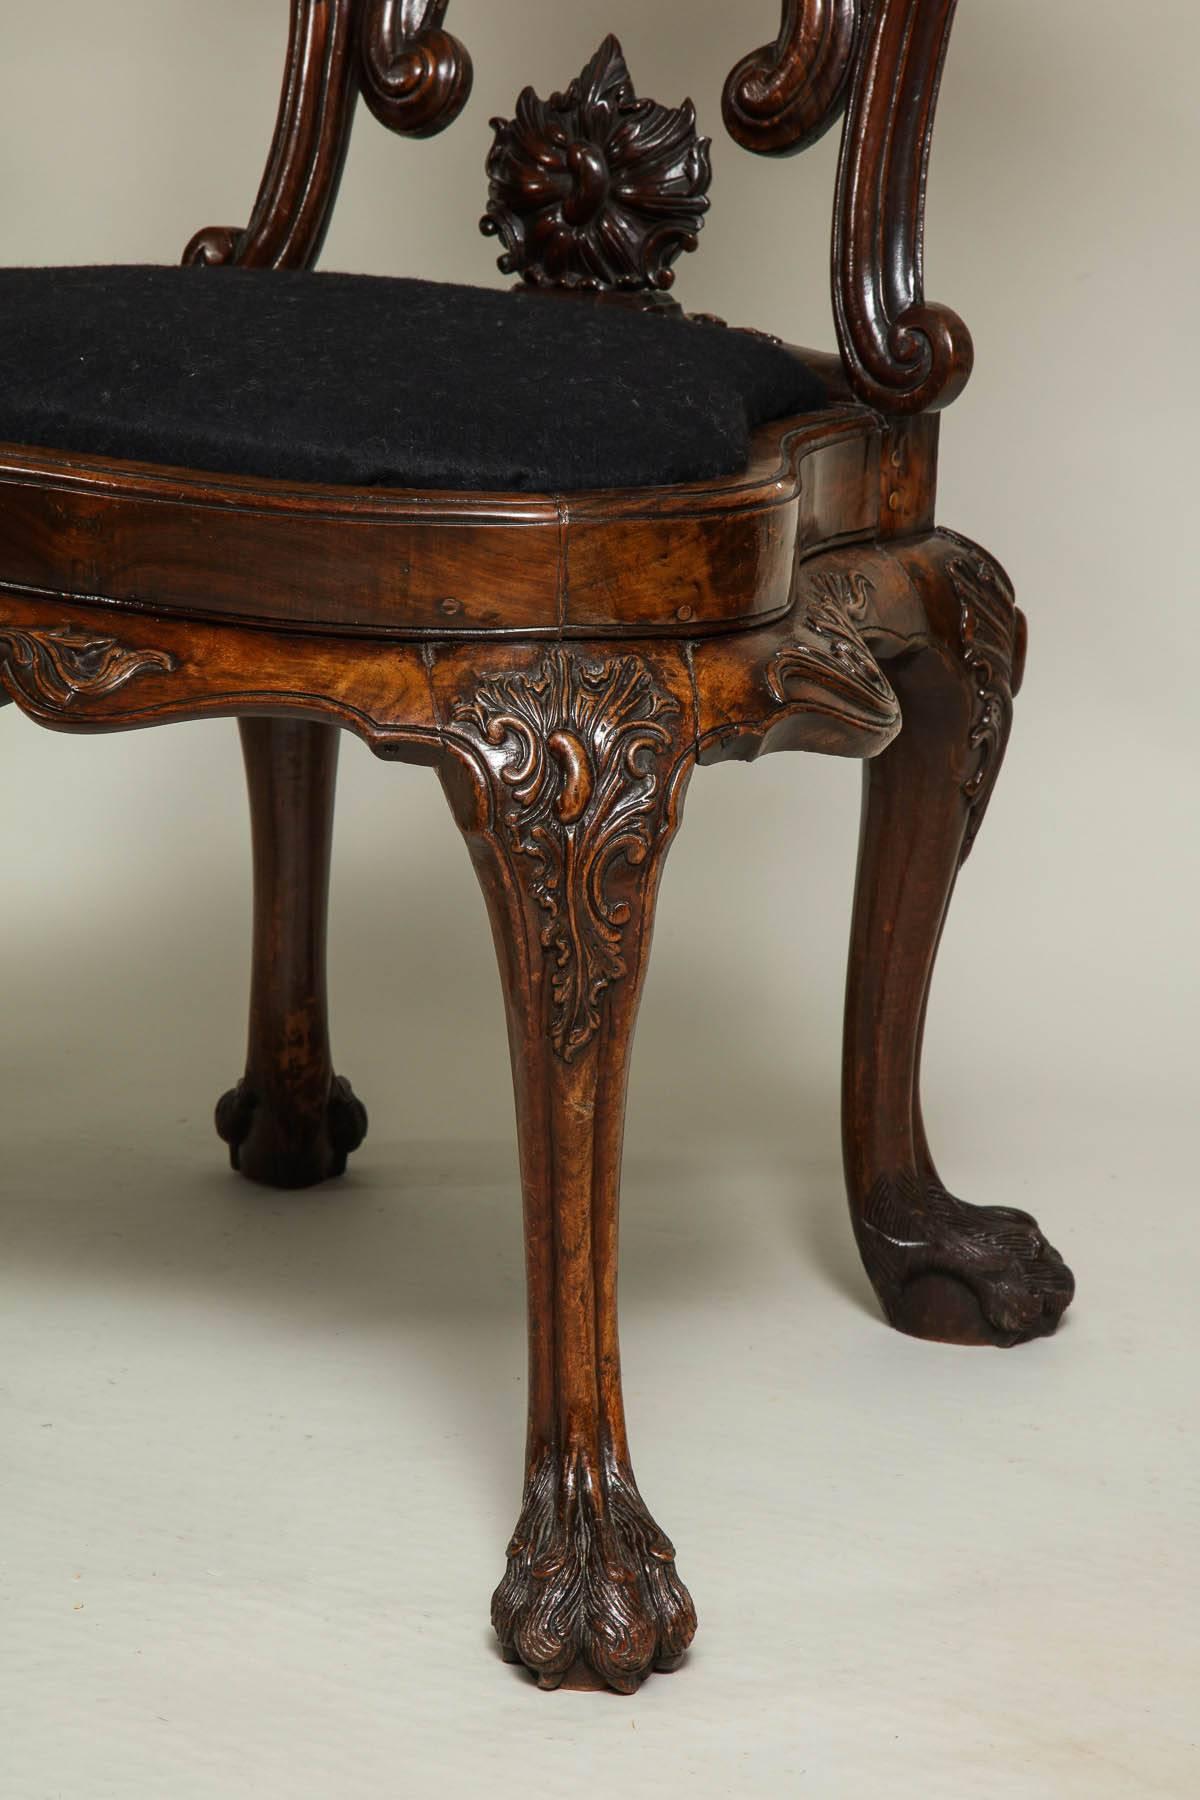 South American Important 18th Century Portuguese Chair For Sale